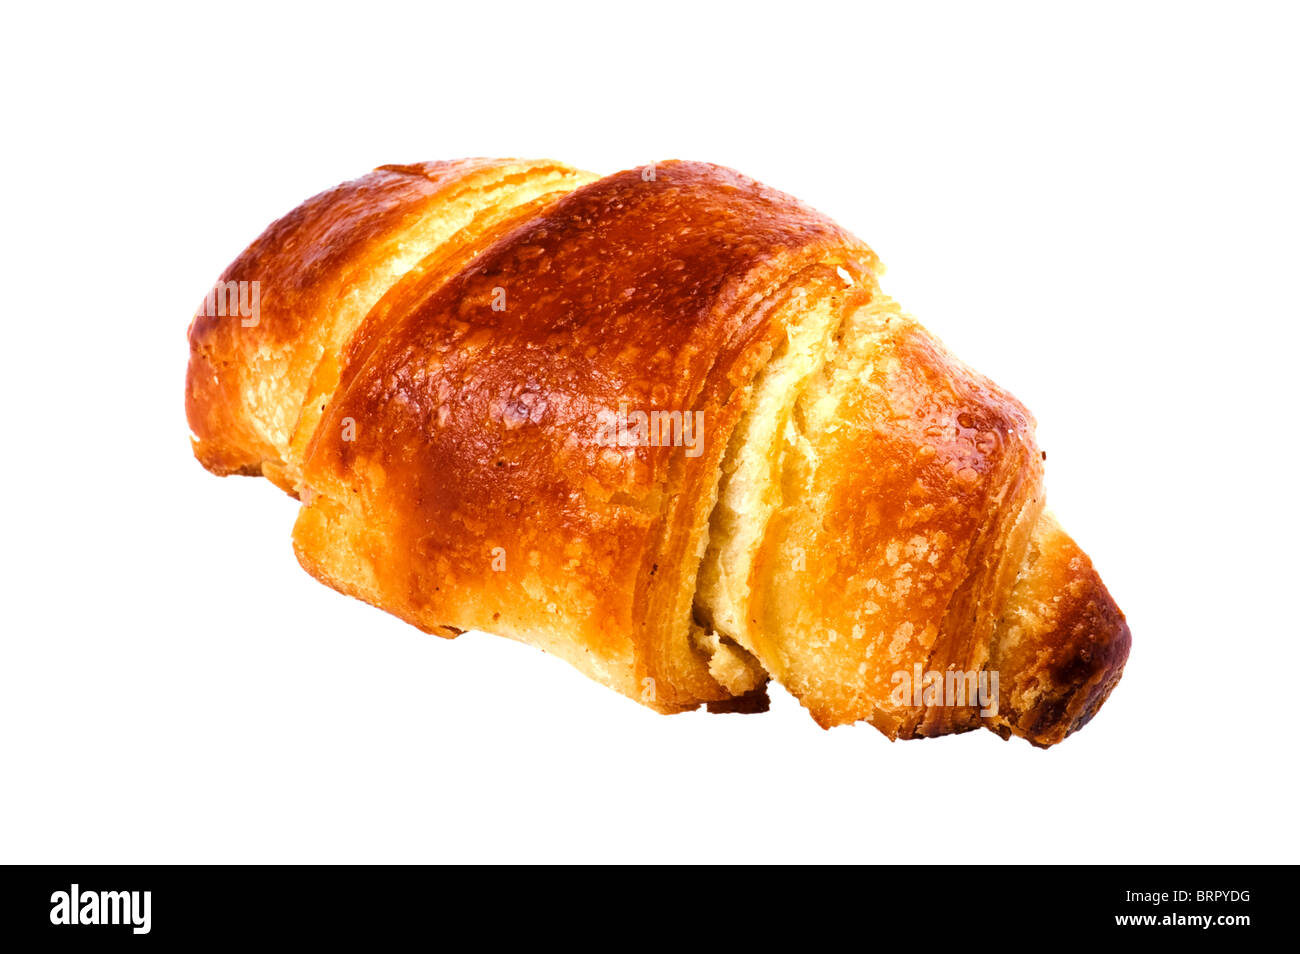 object on white - food croissant close up Stock Photo